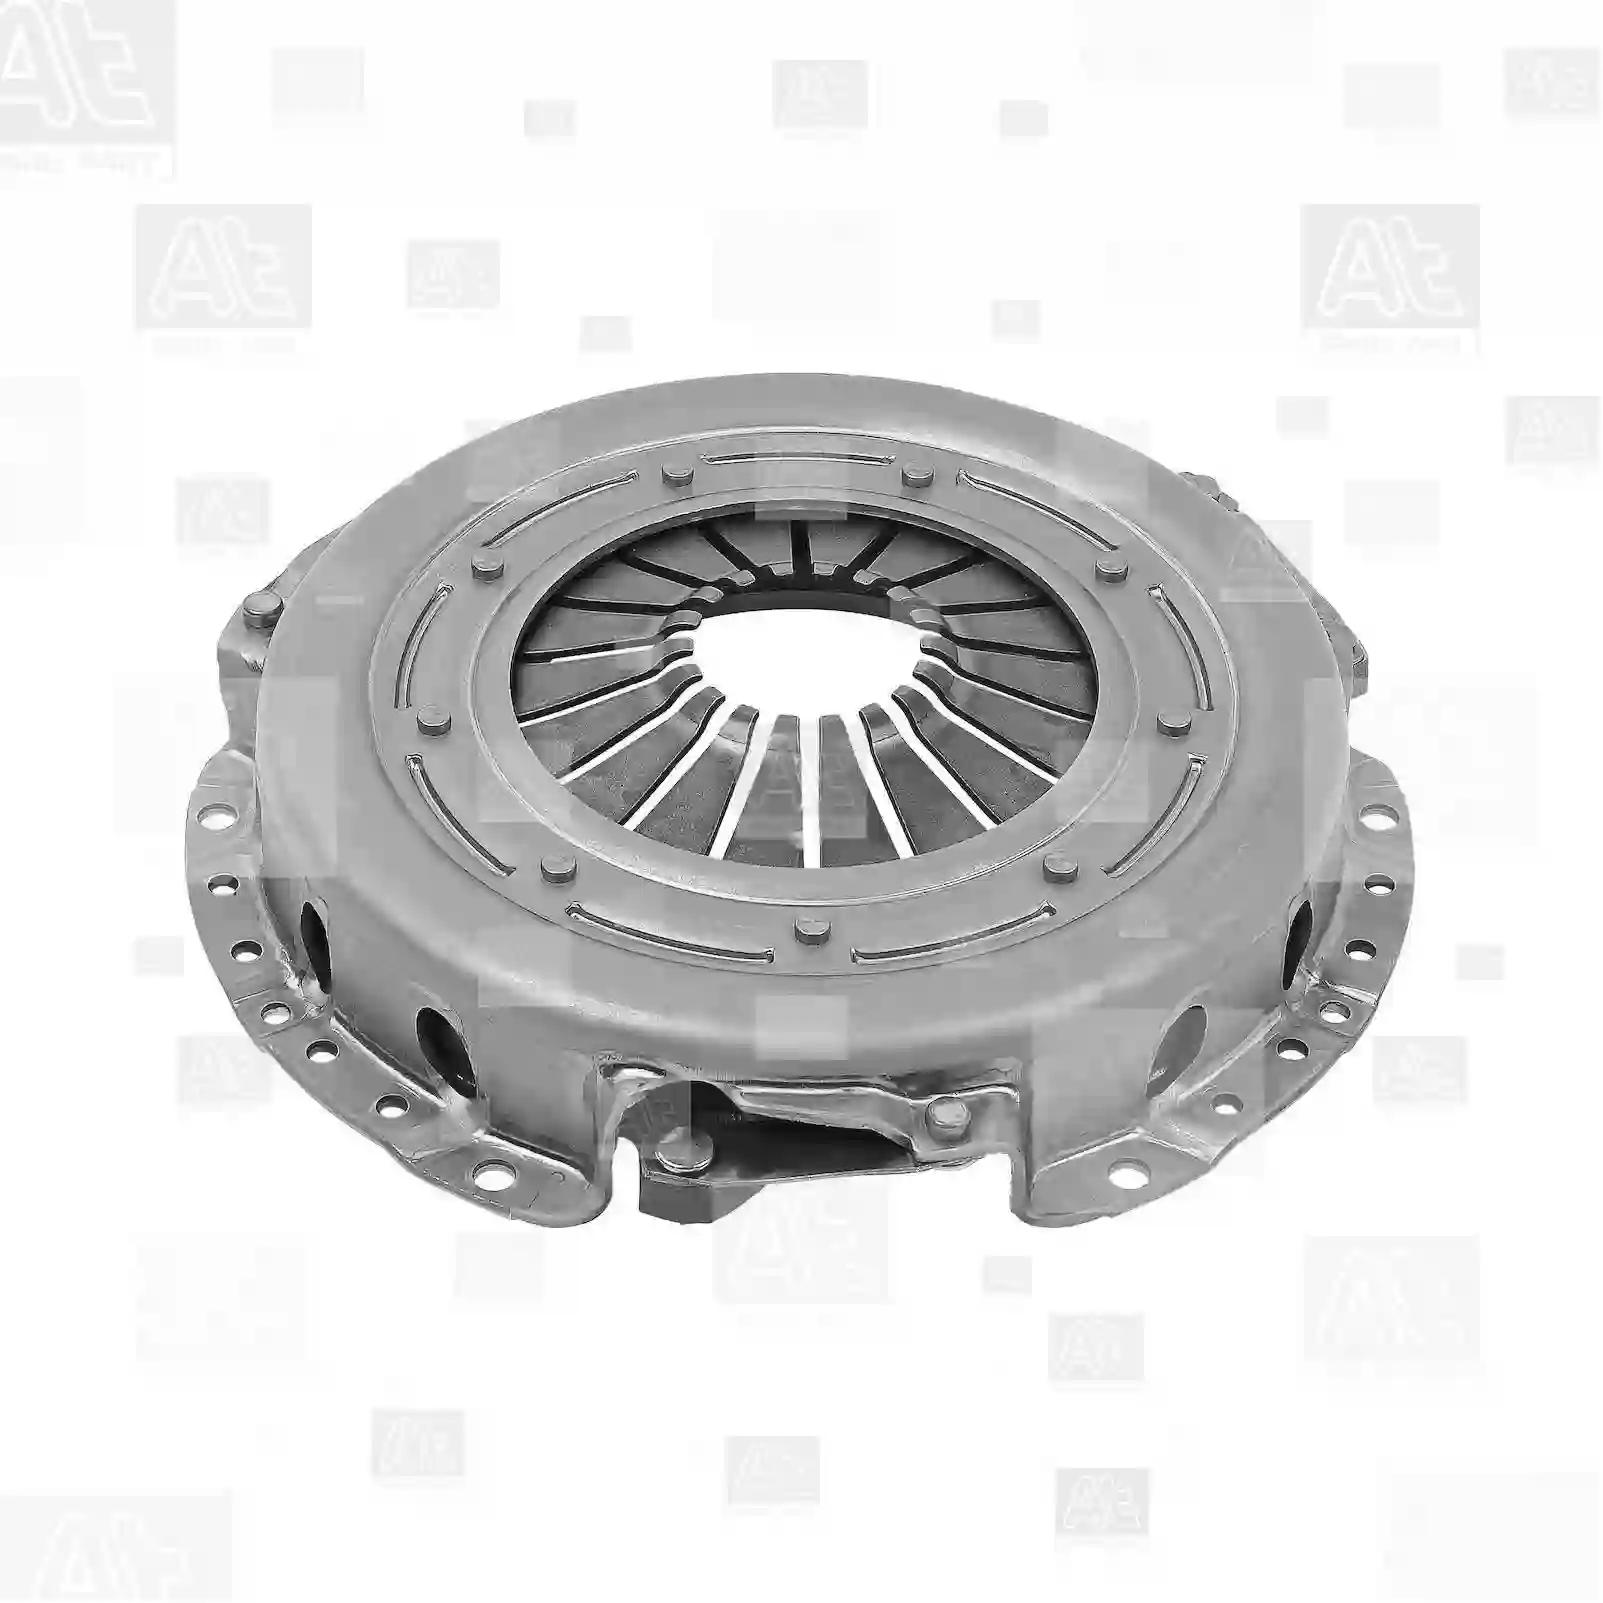 Clutch cover, 77722008, 7932568012, 9350146080, 04745051, 1475197, 1494880, 1518419, 1518960, 1555837, 1579980, 1602085, 1608612, 1645280, 1645297, 5001306, 5002960, 5002961, 5012192, 5019059, 5029570, 5029575, 5050634, 6099571, 6100324, 6104431, 6104432, 6106045, 6120888, 6151999, 6171011, 6177288, 6188558, 6973999, 88GB-7563-AA, 89GB-7563-AA, 89GB-7563-AB, 7932568012, 9350146080, GCP228 ||  77722008 At Spare Part | Engine, Accelerator Pedal, Camshaft, Connecting Rod, Crankcase, Crankshaft, Cylinder Head, Engine Suspension Mountings, Exhaust Manifold, Exhaust Gas Recirculation, Filter Kits, Flywheel Housing, General Overhaul Kits, Engine, Intake Manifold, Oil Cleaner, Oil Cooler, Oil Filter, Oil Pump, Oil Sump, Piston & Liner, Sensor & Switch, Timing Case, Turbocharger, Cooling System, Belt Tensioner, Coolant Filter, Coolant Pipe, Corrosion Prevention Agent, Drive, Expansion Tank, Fan, Intercooler, Monitors & Gauges, Radiator, Thermostat, V-Belt / Timing belt, Water Pump, Fuel System, Electronical Injector Unit, Feed Pump, Fuel Filter, cpl., Fuel Gauge Sender,  Fuel Line, Fuel Pump, Fuel Tank, Injection Line Kit, Injection Pump, Exhaust System, Clutch & Pedal, Gearbox, Propeller Shaft, Axles, Brake System, Hubs & Wheels, Suspension, Leaf Spring, Universal Parts / Accessories, Steering, Electrical System, Cabin Clutch cover, 77722008, 7932568012, 9350146080, 04745051, 1475197, 1494880, 1518419, 1518960, 1555837, 1579980, 1602085, 1608612, 1645280, 1645297, 5001306, 5002960, 5002961, 5012192, 5019059, 5029570, 5029575, 5050634, 6099571, 6100324, 6104431, 6104432, 6106045, 6120888, 6151999, 6171011, 6177288, 6188558, 6973999, 88GB-7563-AA, 89GB-7563-AA, 89GB-7563-AB, 7932568012, 9350146080, GCP228 ||  77722008 At Spare Part | Engine, Accelerator Pedal, Camshaft, Connecting Rod, Crankcase, Crankshaft, Cylinder Head, Engine Suspension Mountings, Exhaust Manifold, Exhaust Gas Recirculation, Filter Kits, Flywheel Housing, General Overhaul Kits, Engine, Intake Manifold, Oil Cleaner, Oil Cooler, Oil Filter, Oil Pump, Oil Sump, Piston & Liner, Sensor & Switch, Timing Case, Turbocharger, Cooling System, Belt Tensioner, Coolant Filter, Coolant Pipe, Corrosion Prevention Agent, Drive, Expansion Tank, Fan, Intercooler, Monitors & Gauges, Radiator, Thermostat, V-Belt / Timing belt, Water Pump, Fuel System, Electronical Injector Unit, Feed Pump, Fuel Filter, cpl., Fuel Gauge Sender,  Fuel Line, Fuel Pump, Fuel Tank, Injection Line Kit, Injection Pump, Exhaust System, Clutch & Pedal, Gearbox, Propeller Shaft, Axles, Brake System, Hubs & Wheels, Suspension, Leaf Spring, Universal Parts / Accessories, Steering, Electrical System, Cabin